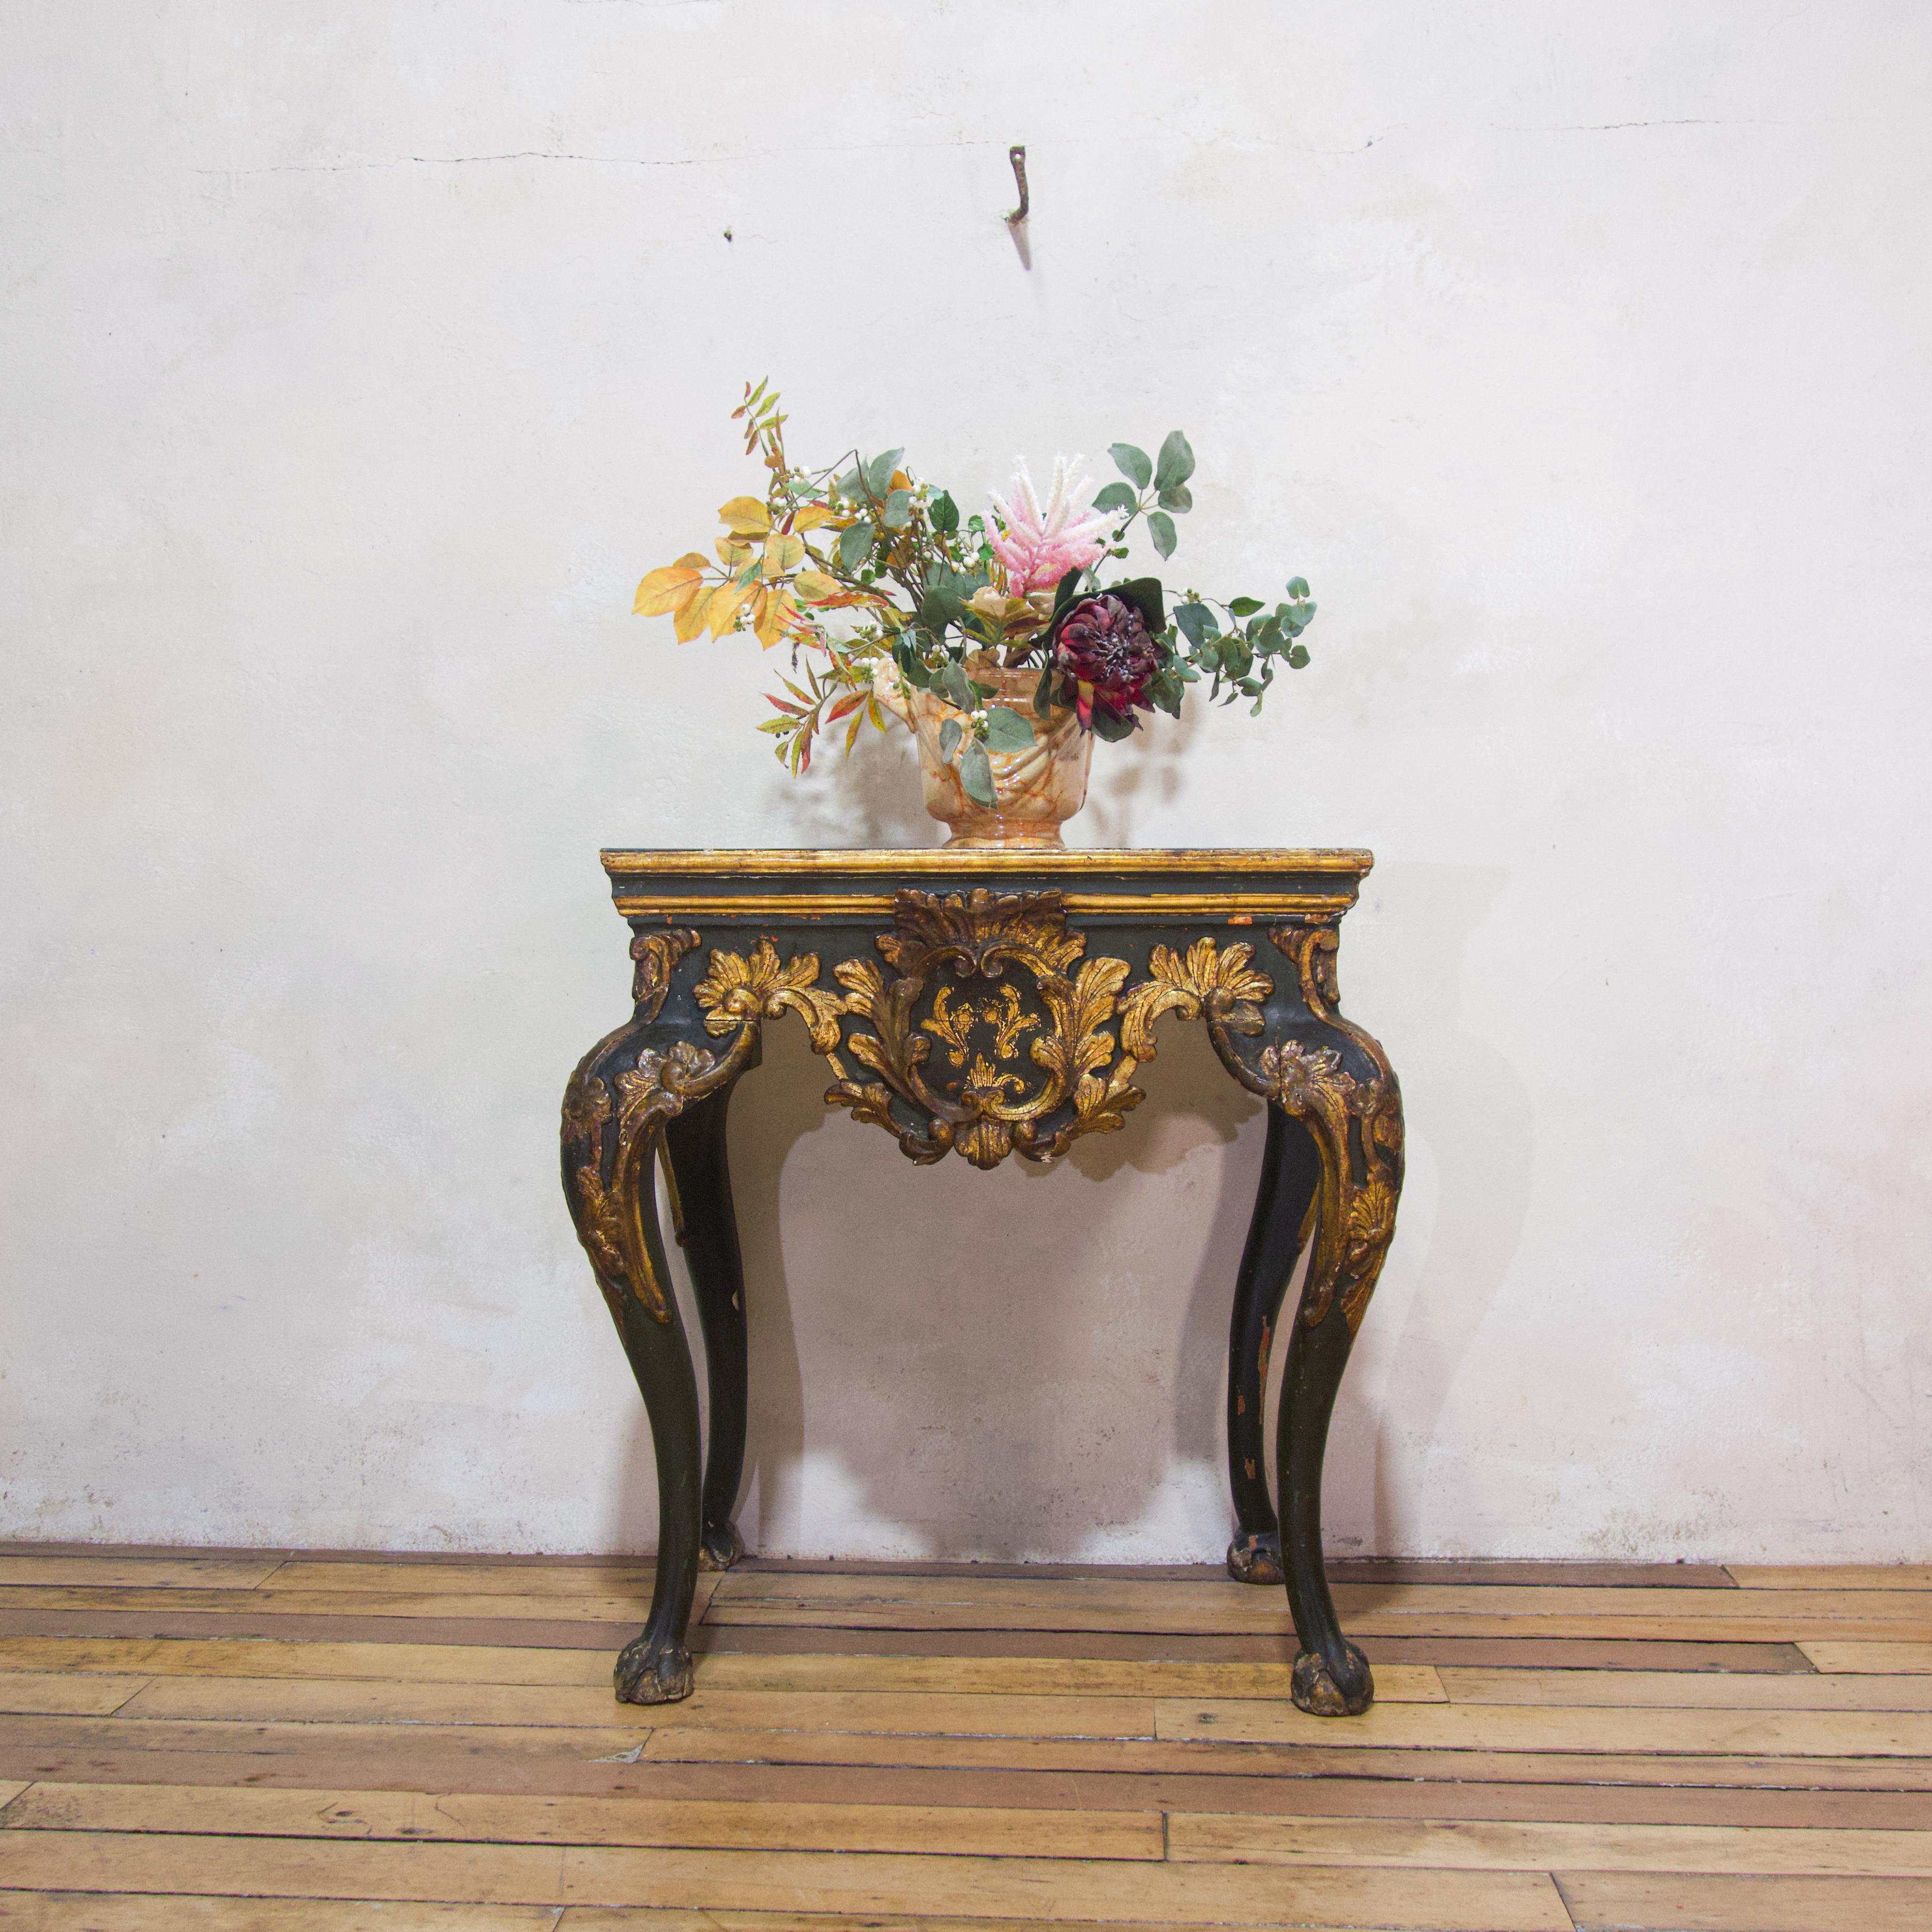 An exceptional early 18th century Italian Baroque console table. Demonstrating its original rich green paint with gilded detailing throughout. Displaying an inset rouge marble top above a shaped apron with scrolling acanthus decoration. Raised on